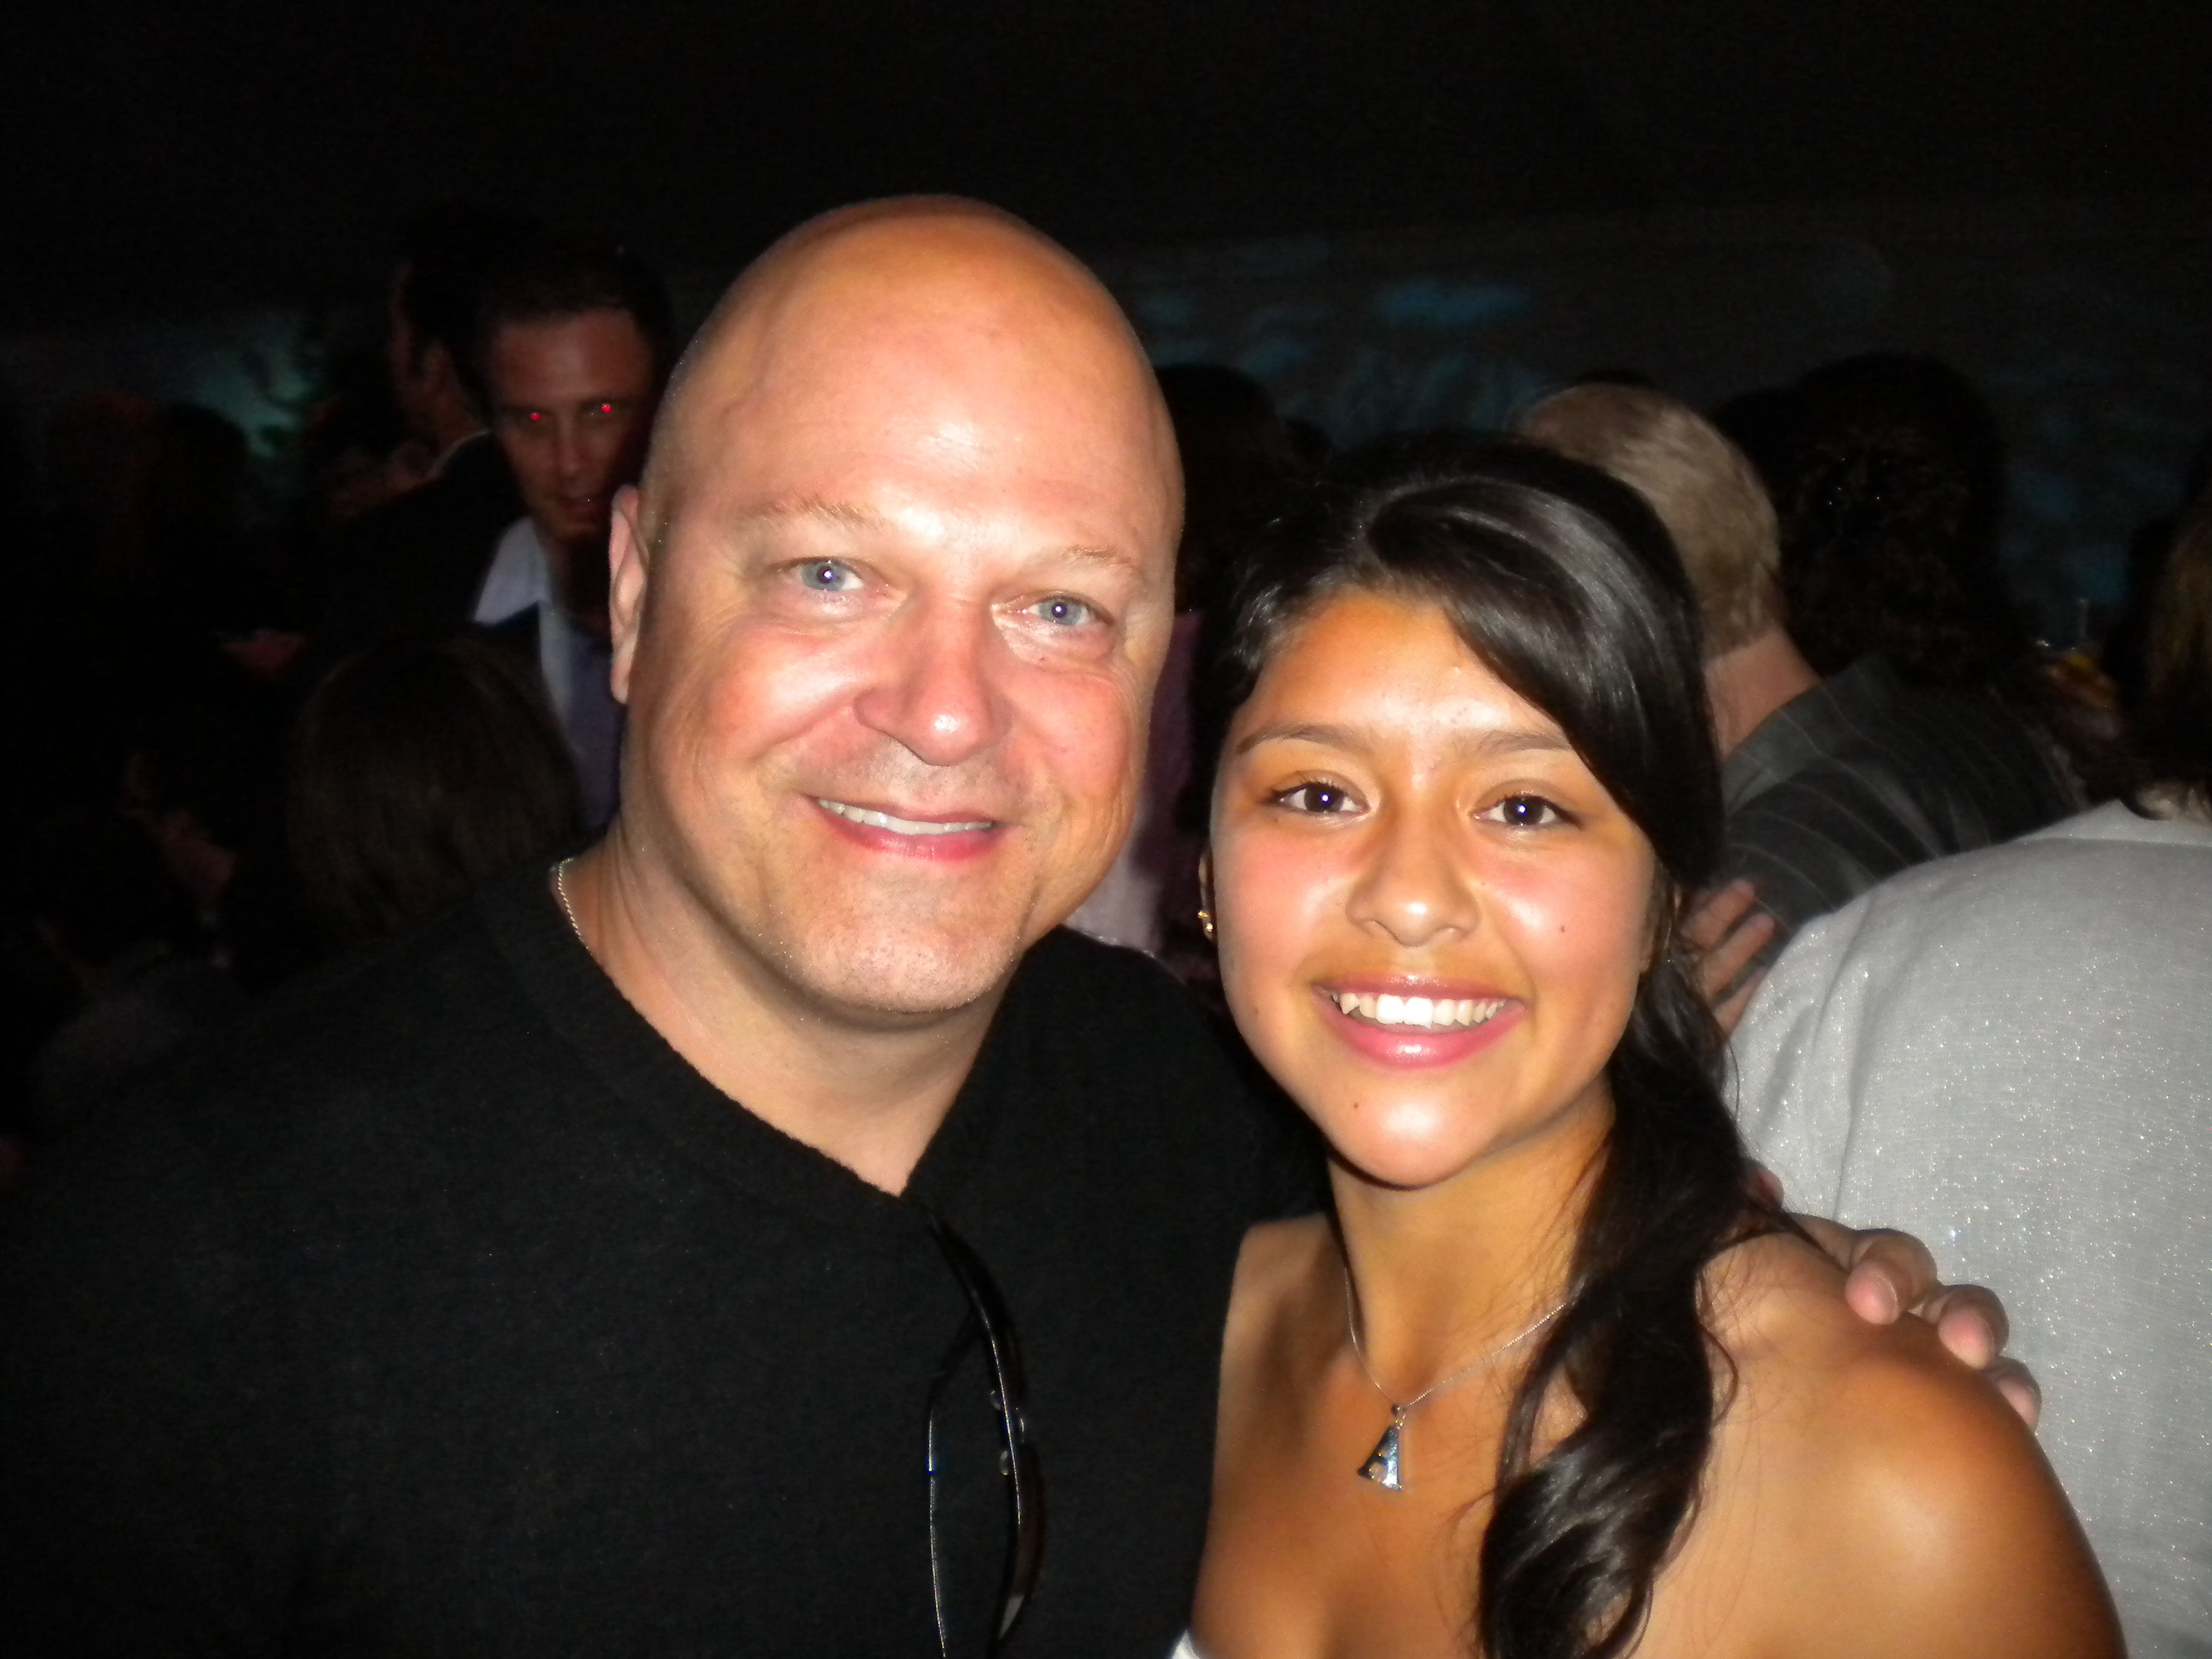 Chelsea and Michael Chiklis at the Eclipse Premeiere After Party